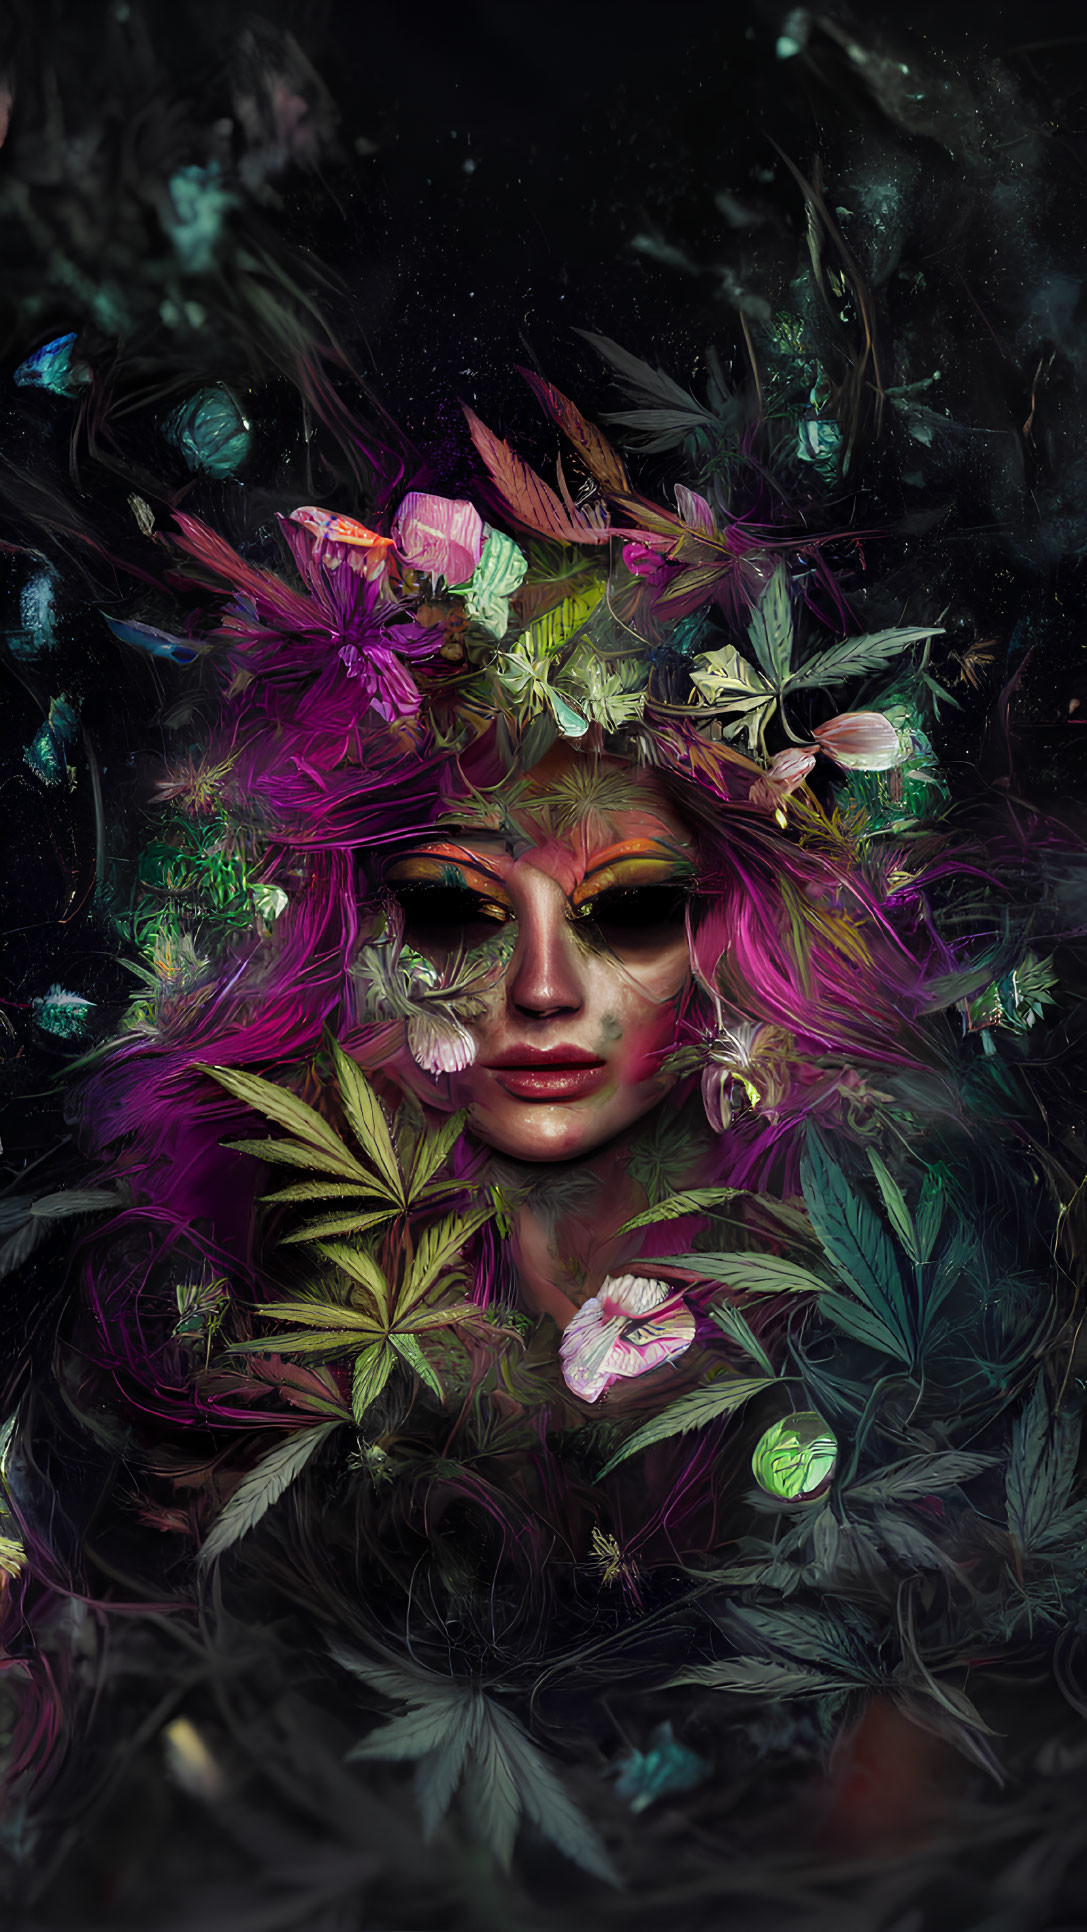 Vibrant Makeup and Purple Hair Woman with Mystical Aura and Butterflies